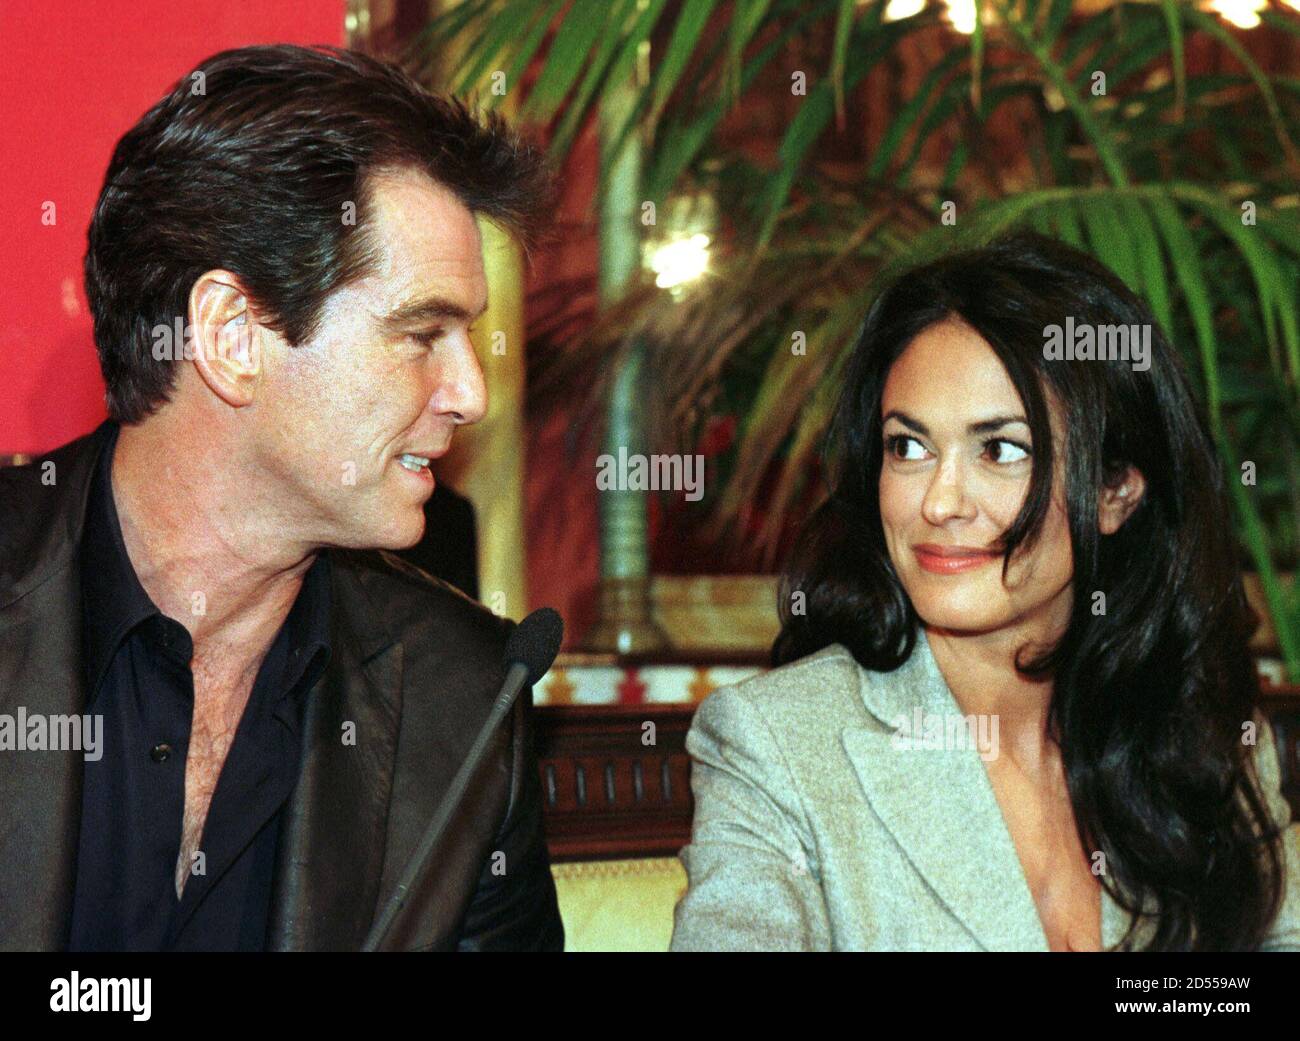 Actor Pierce Brosnan looks at Italian actress Maria Grazia Cuccinotta after arriving in Bilbao February 15. Brosnan and Cuccinotta will film in Spain some sequences for the new James Bond film "The World is not Enough", also starring [Robert Carlyle, Serena Scott Thomas, Denise Richards and Sophie Marceau.] Banque D'Images